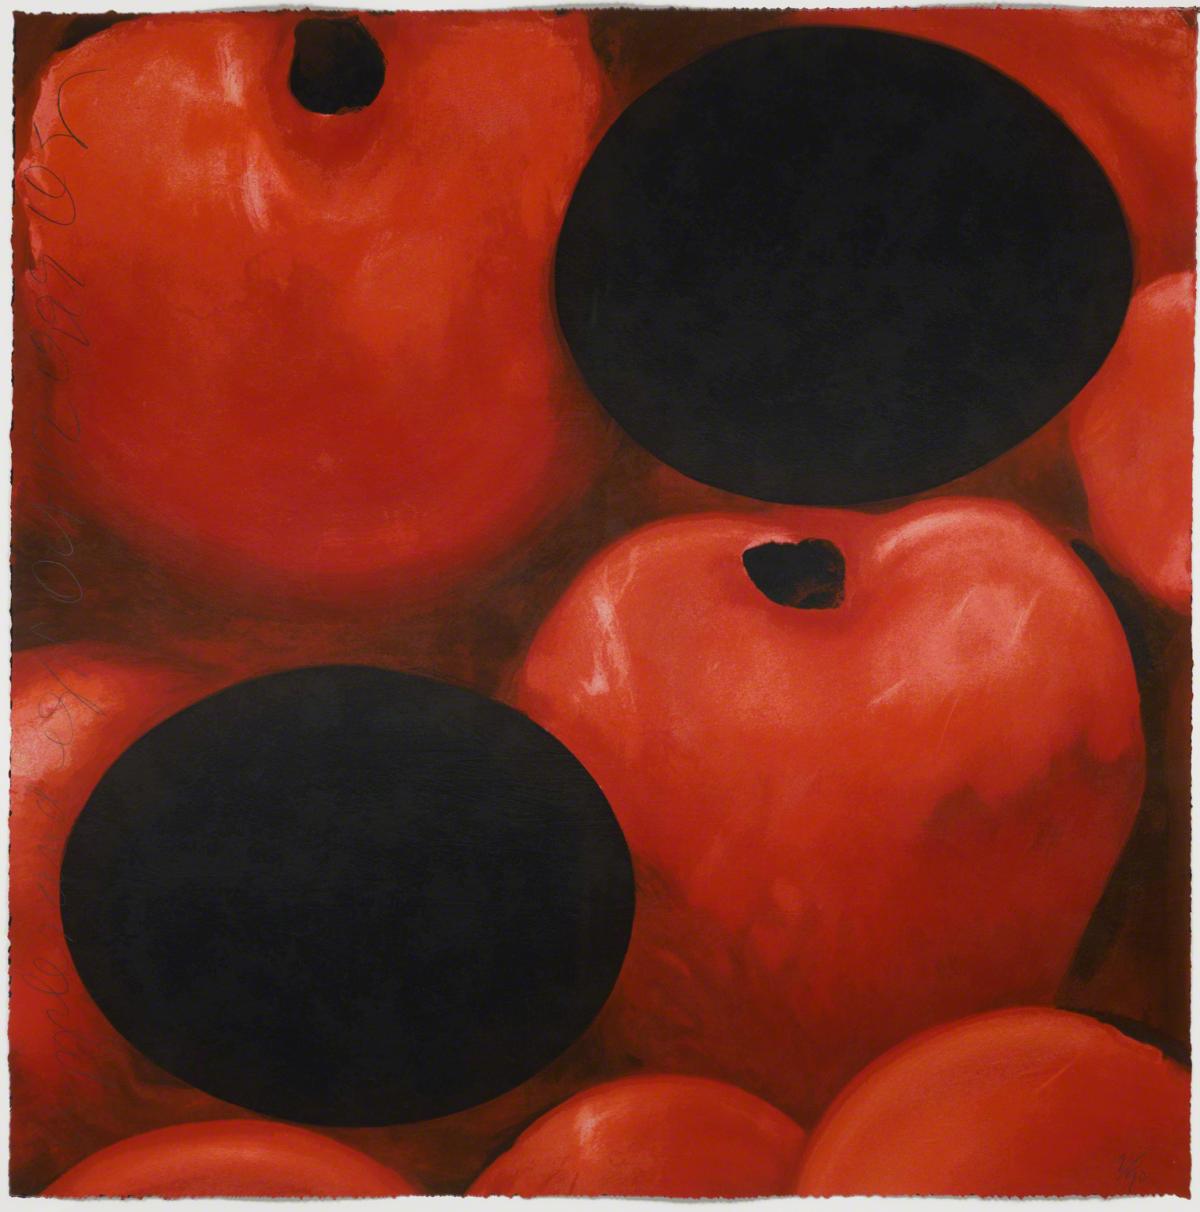 Large work on paper depicting red apples with two egg shaped black spots